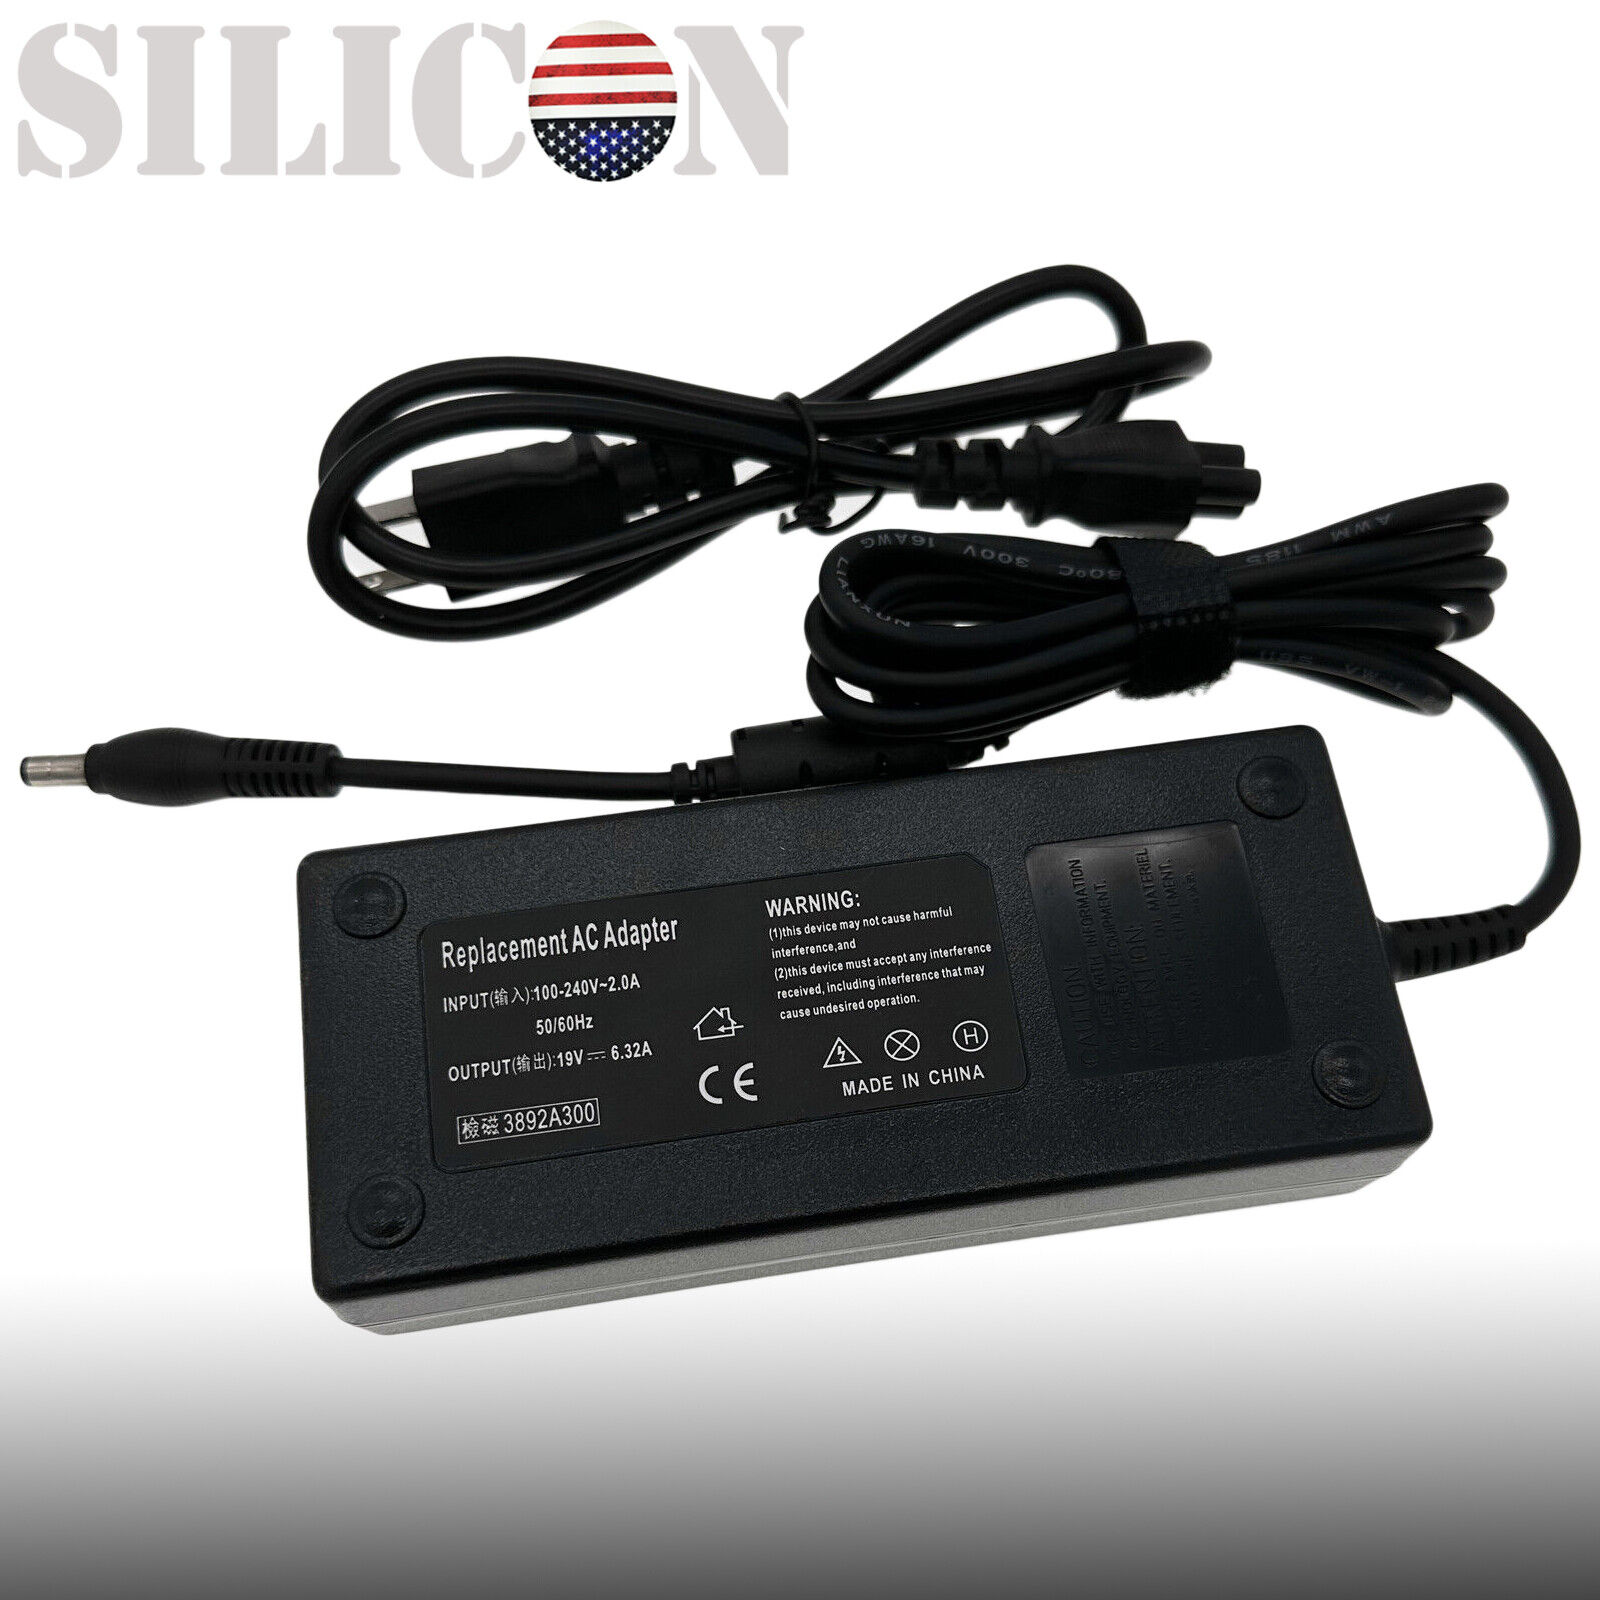 120W AC ADAPTER CHARGER POWER FOR LENOVO IDEAPAD Y560 Y560D Y560P Y570 LAPTOP